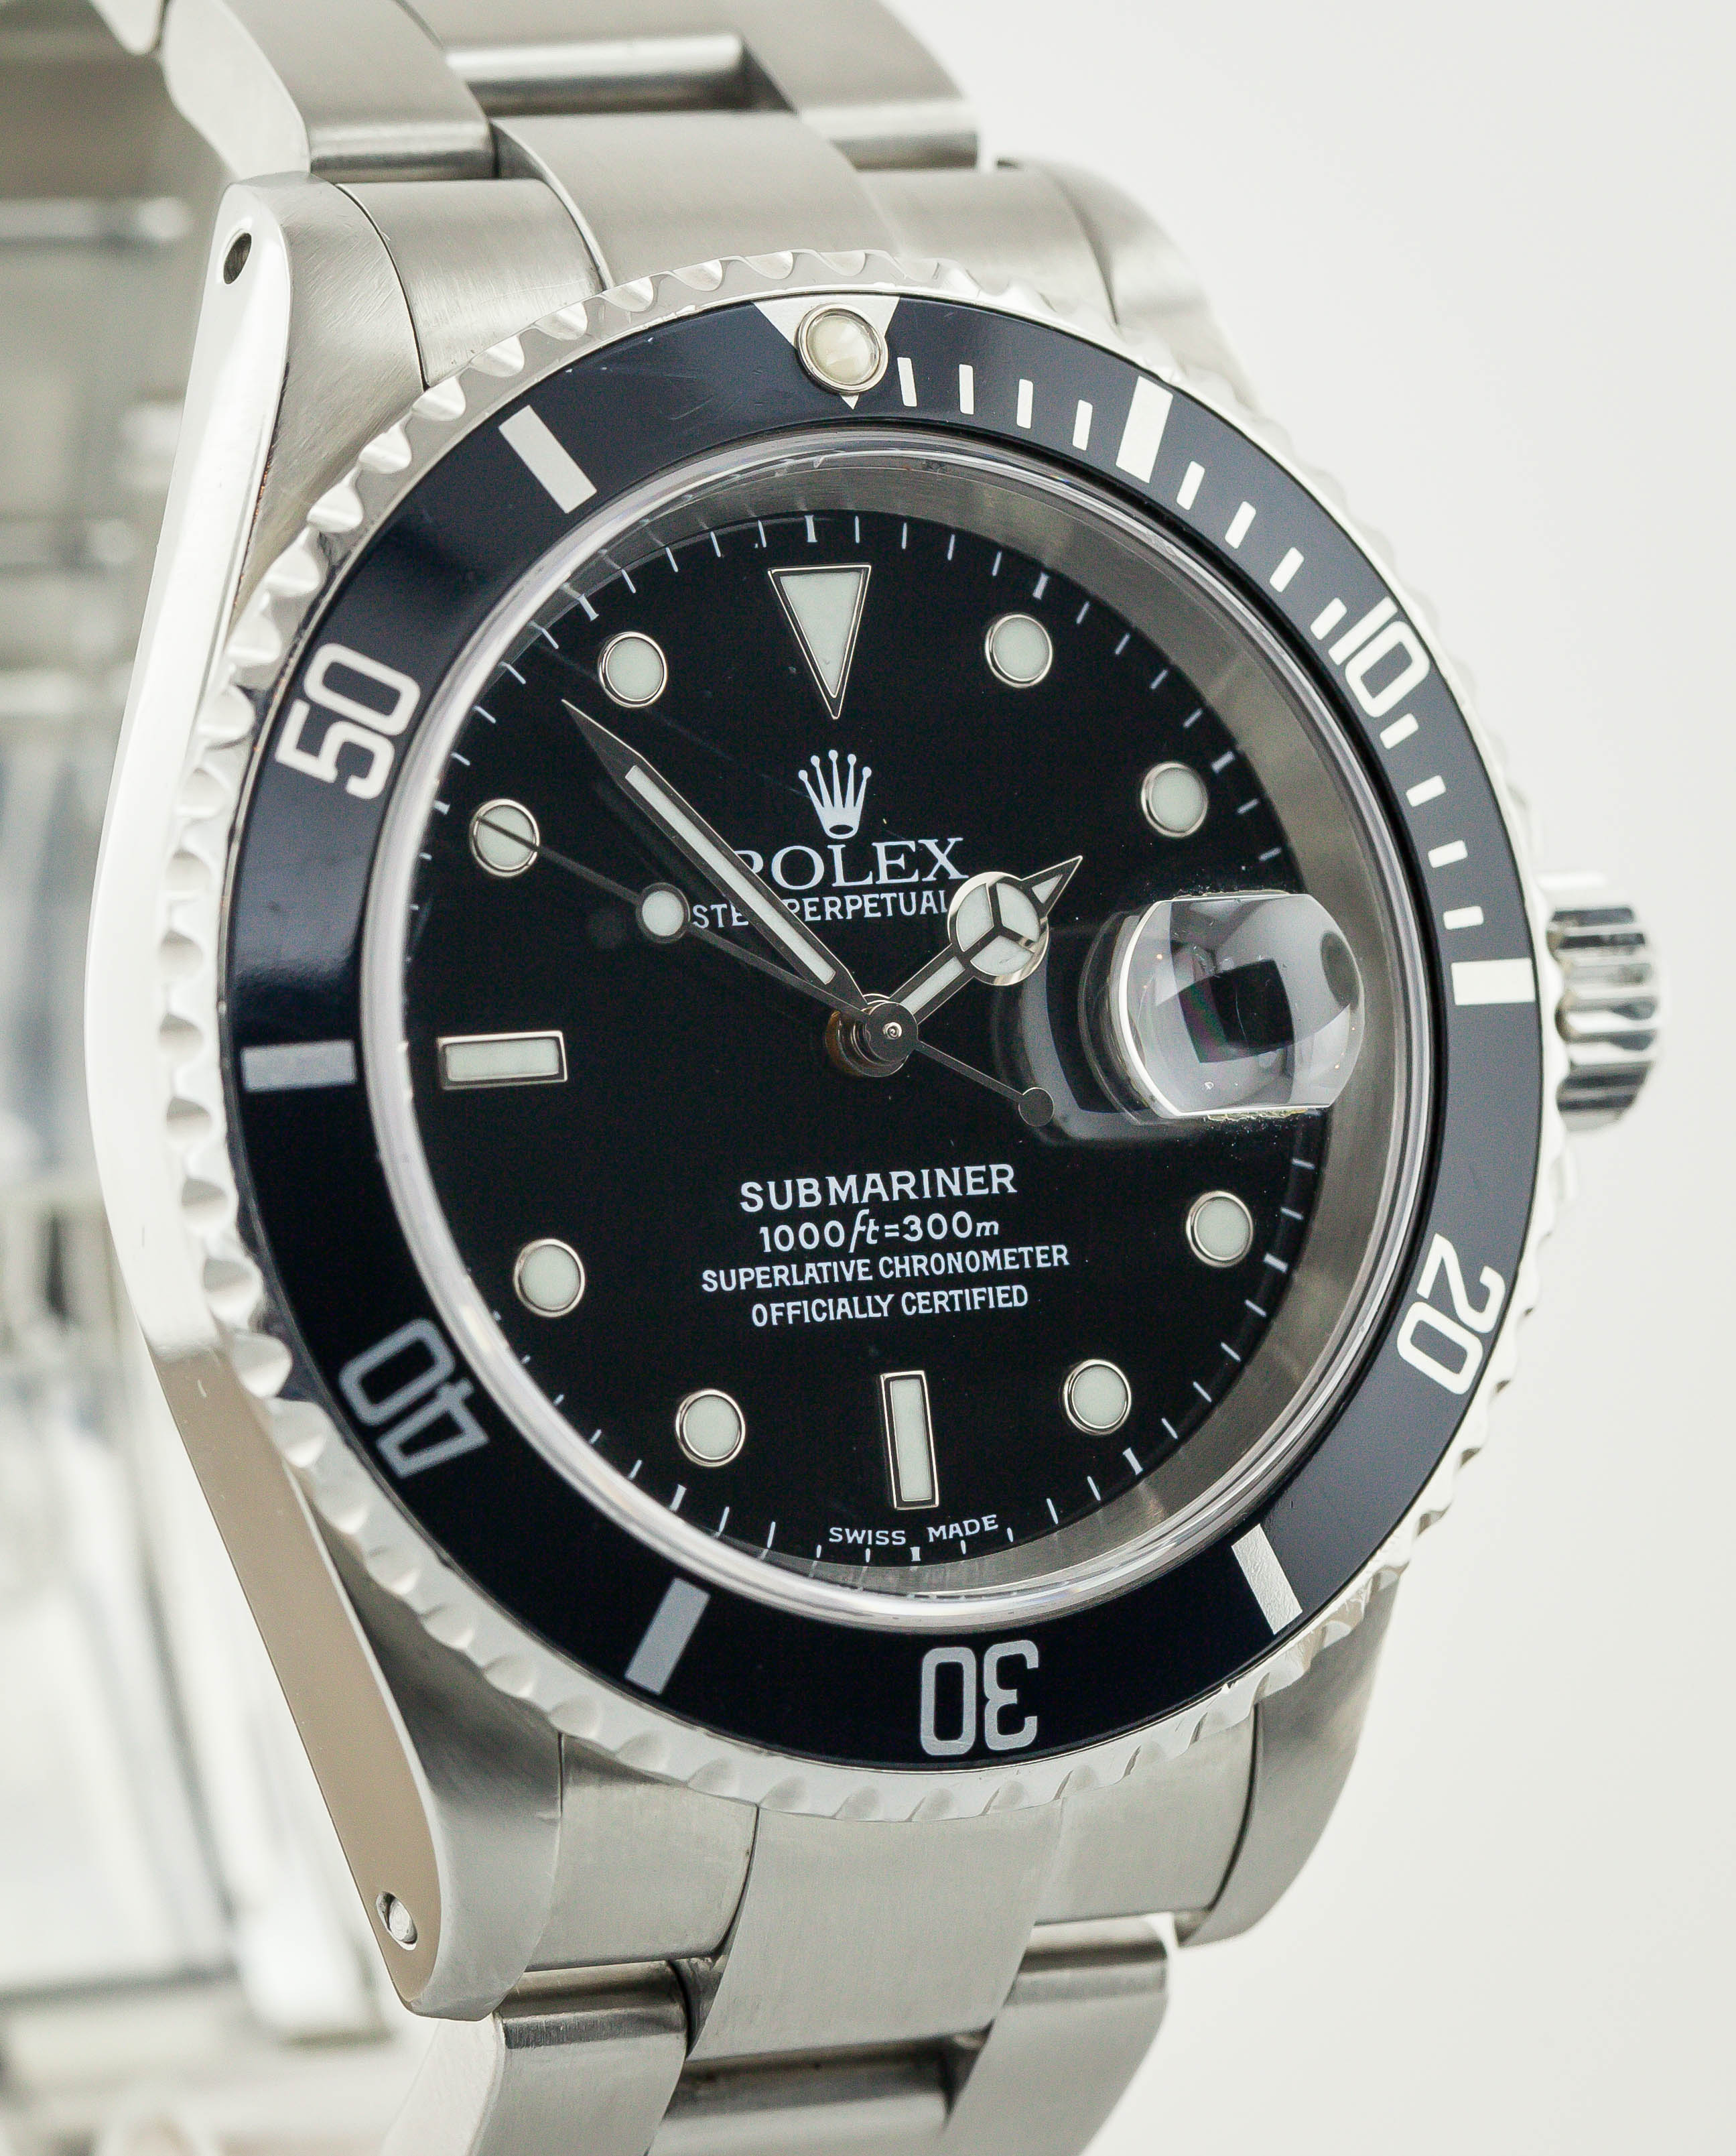 Wear Your Style Right with Rolex Watches